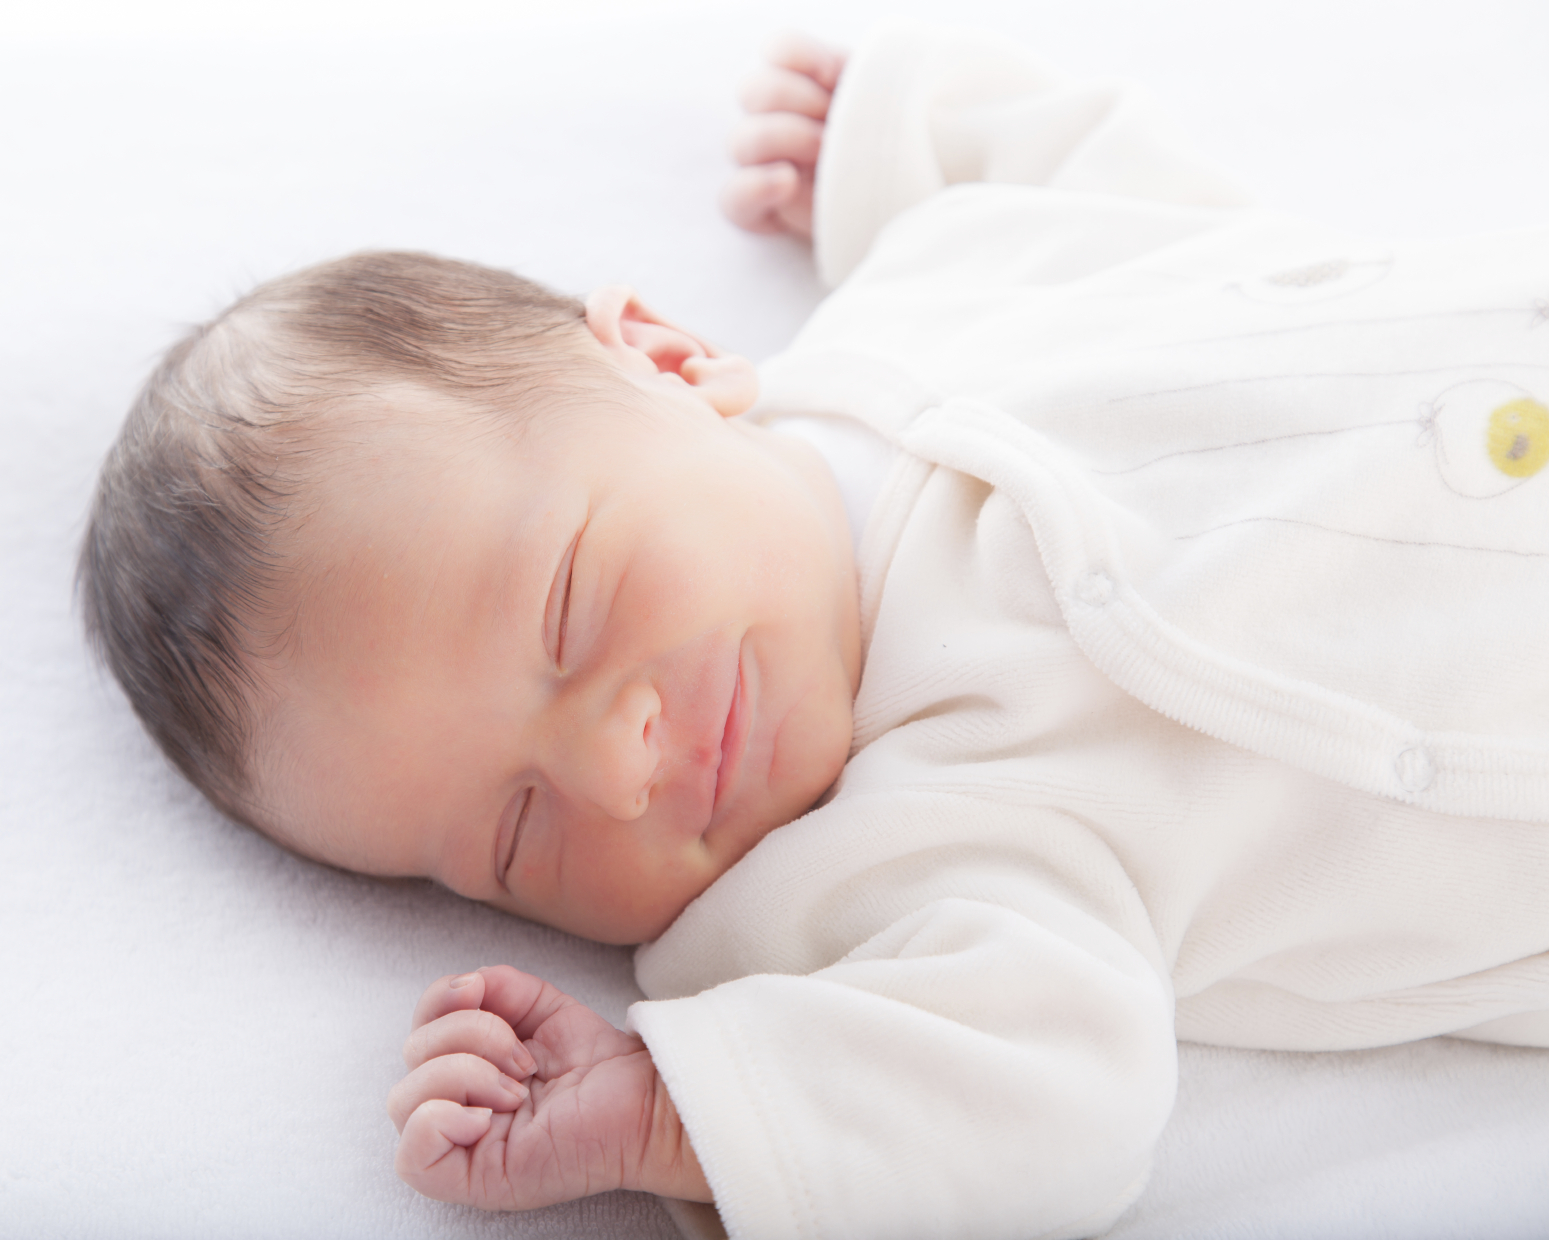 Alert Issued For Fisher-Price Baby Sleeper Following Reports Of Infant Deaths